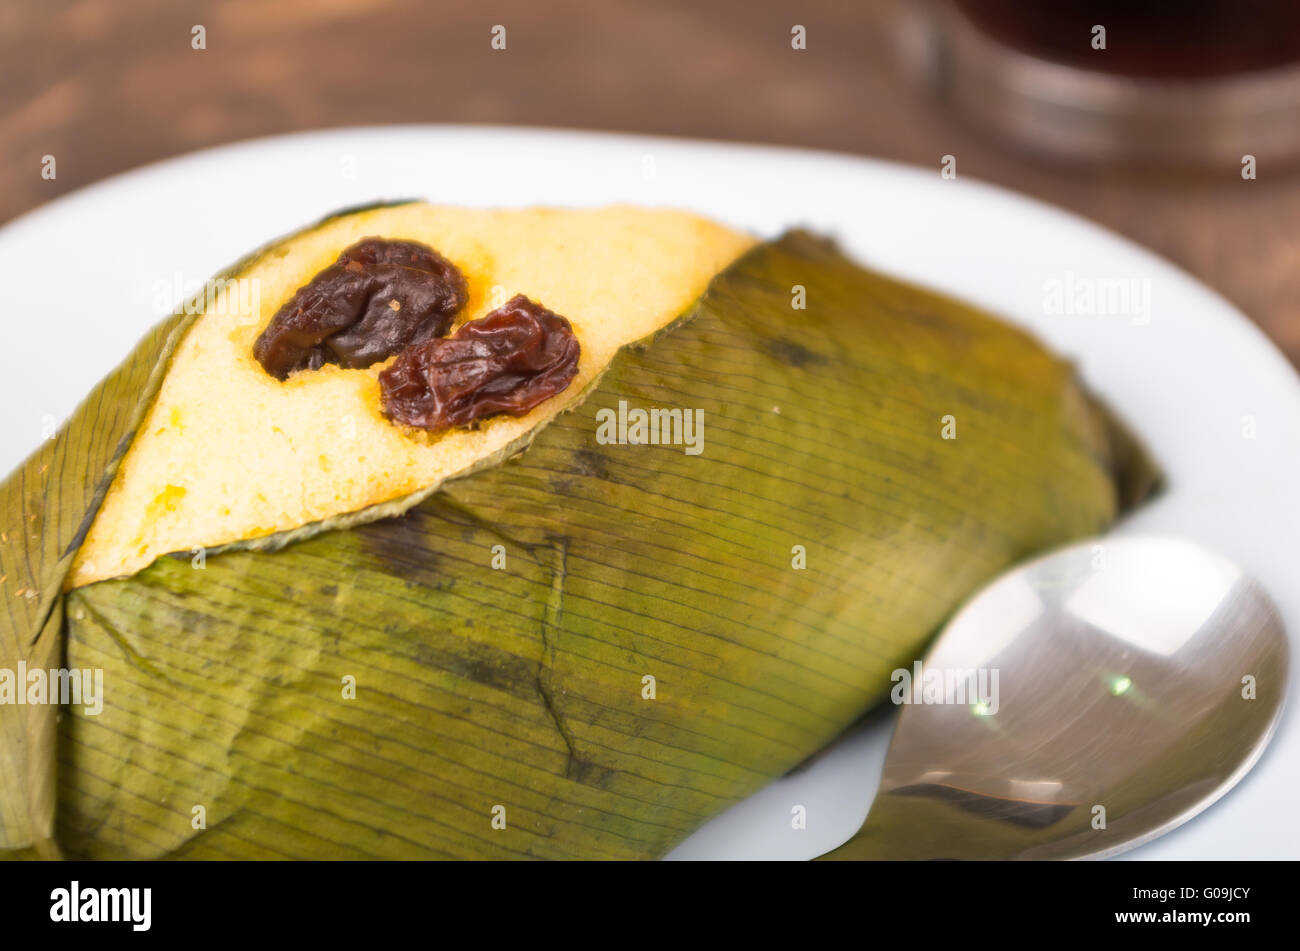 Two raisins in the middle of quimbolito, traditional of Ecuador Stock Photo